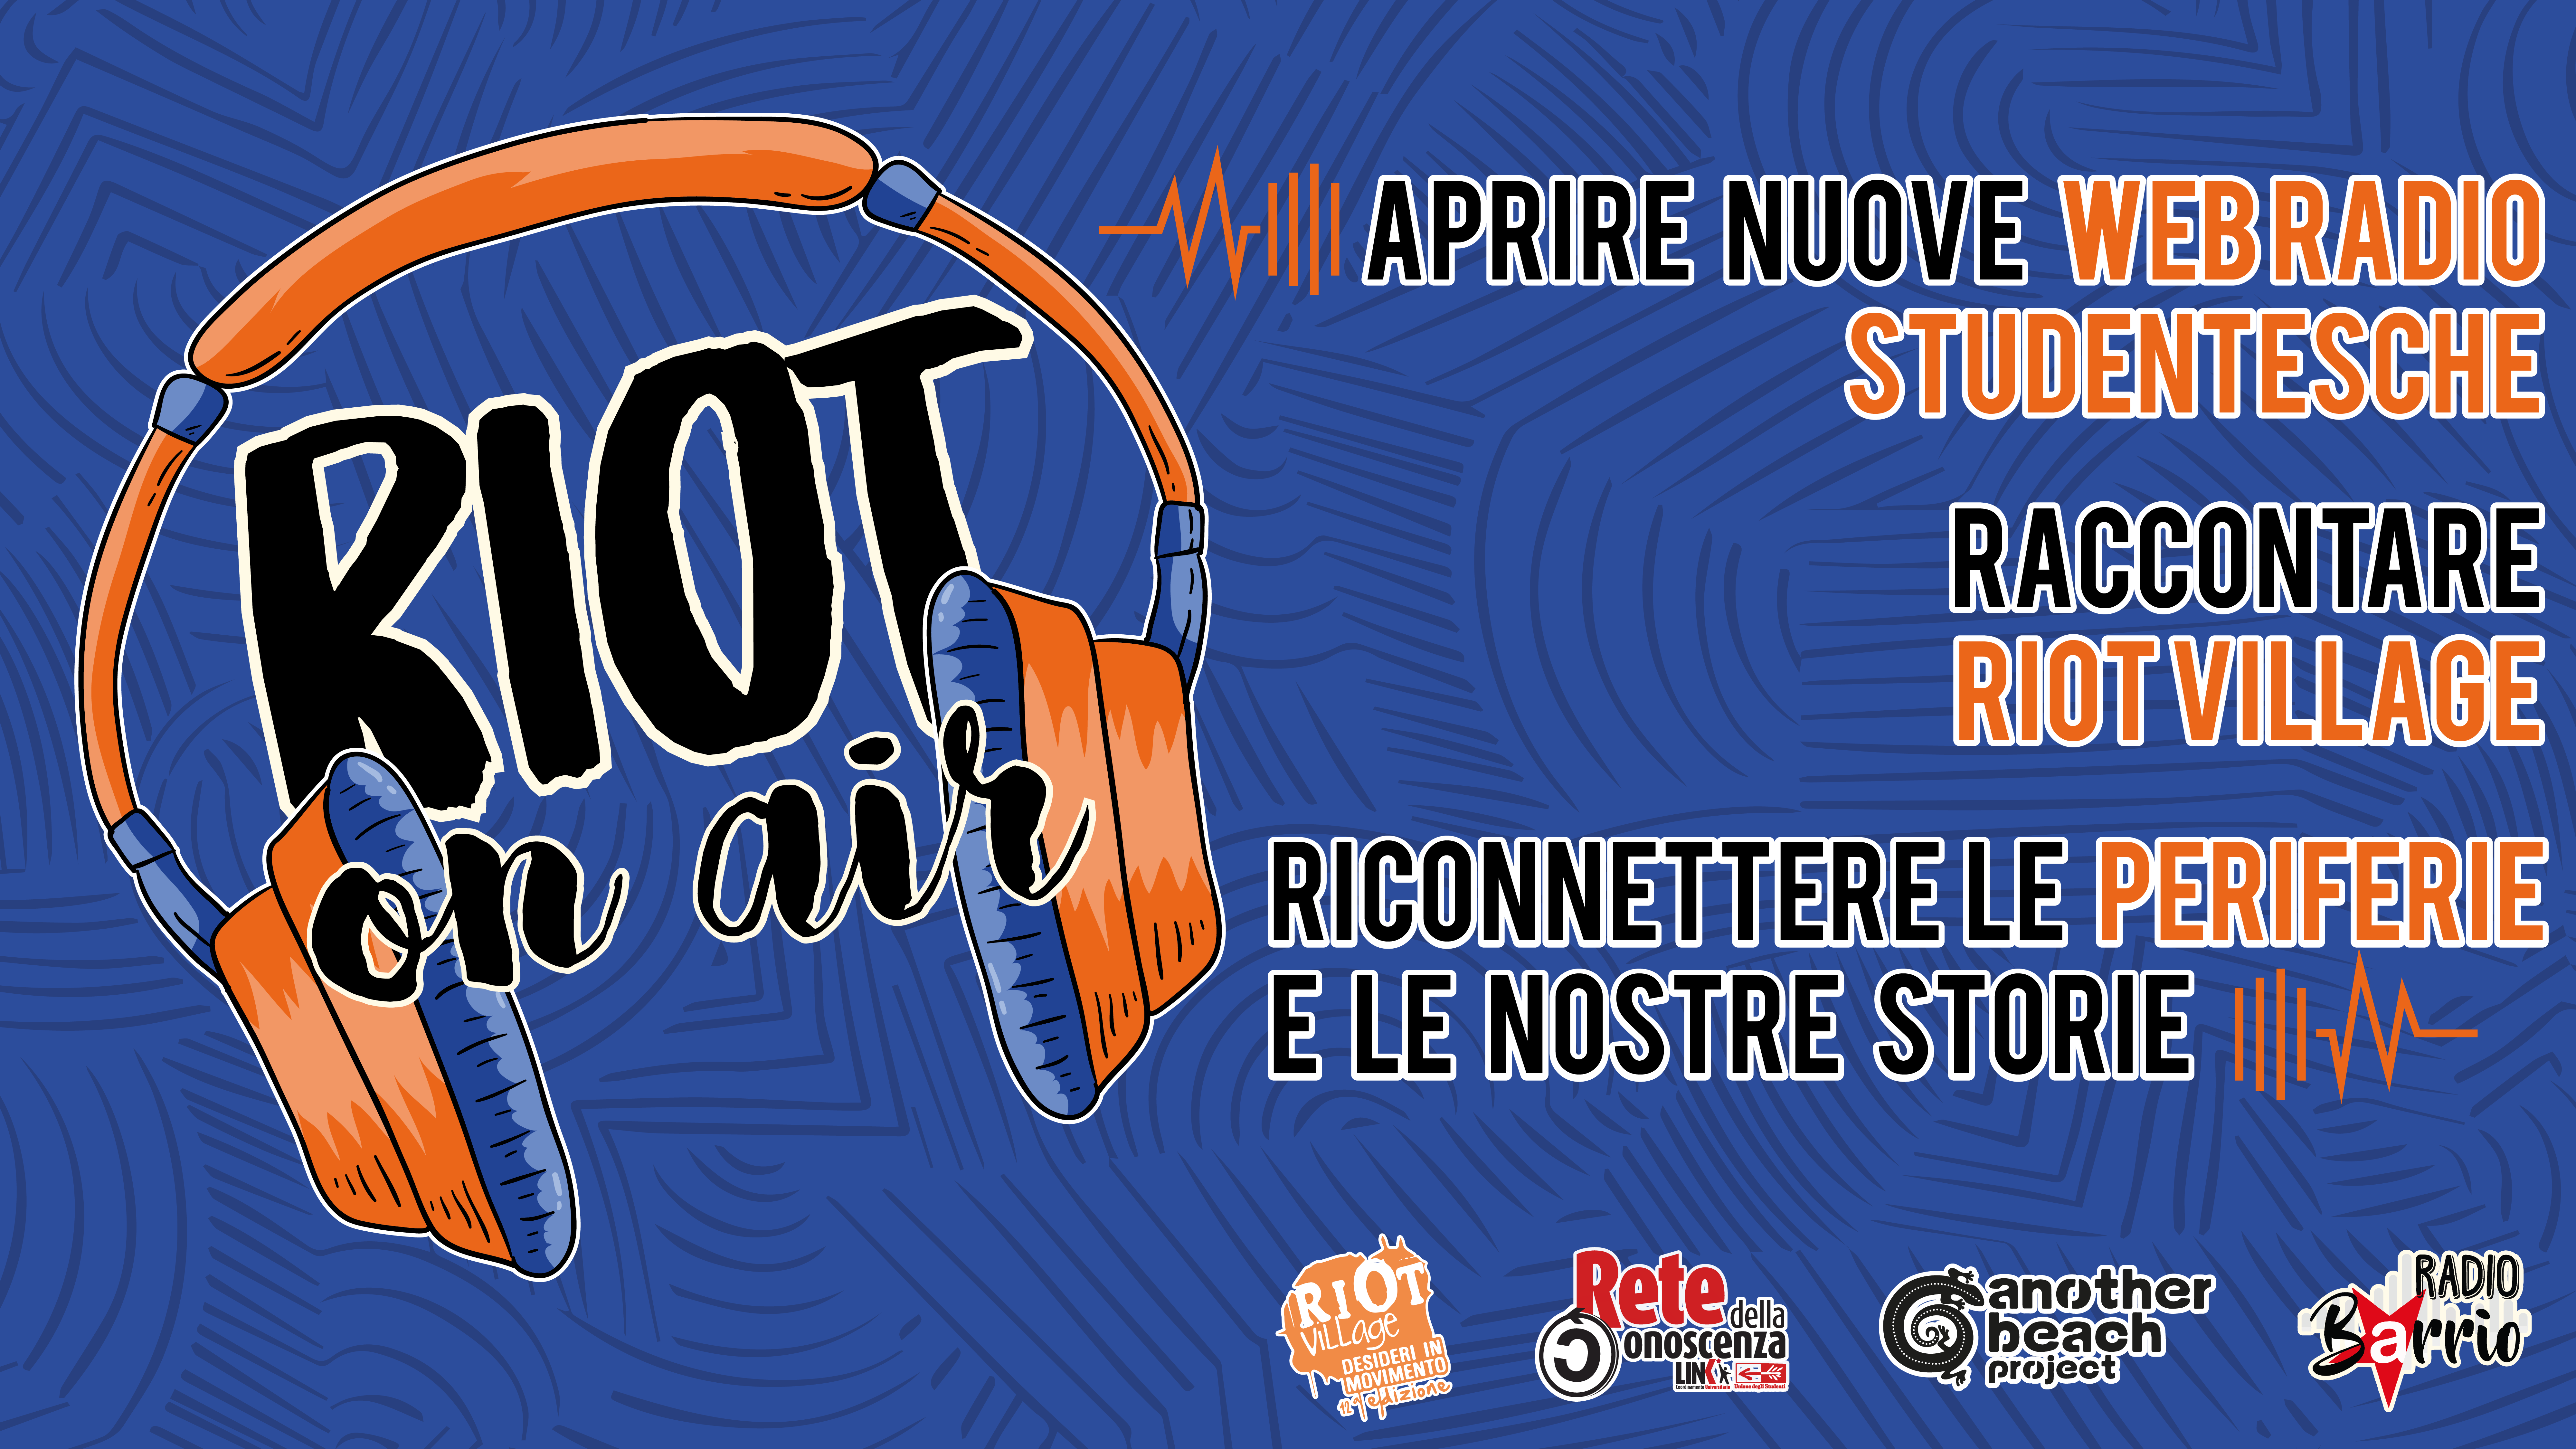 Riot on air!